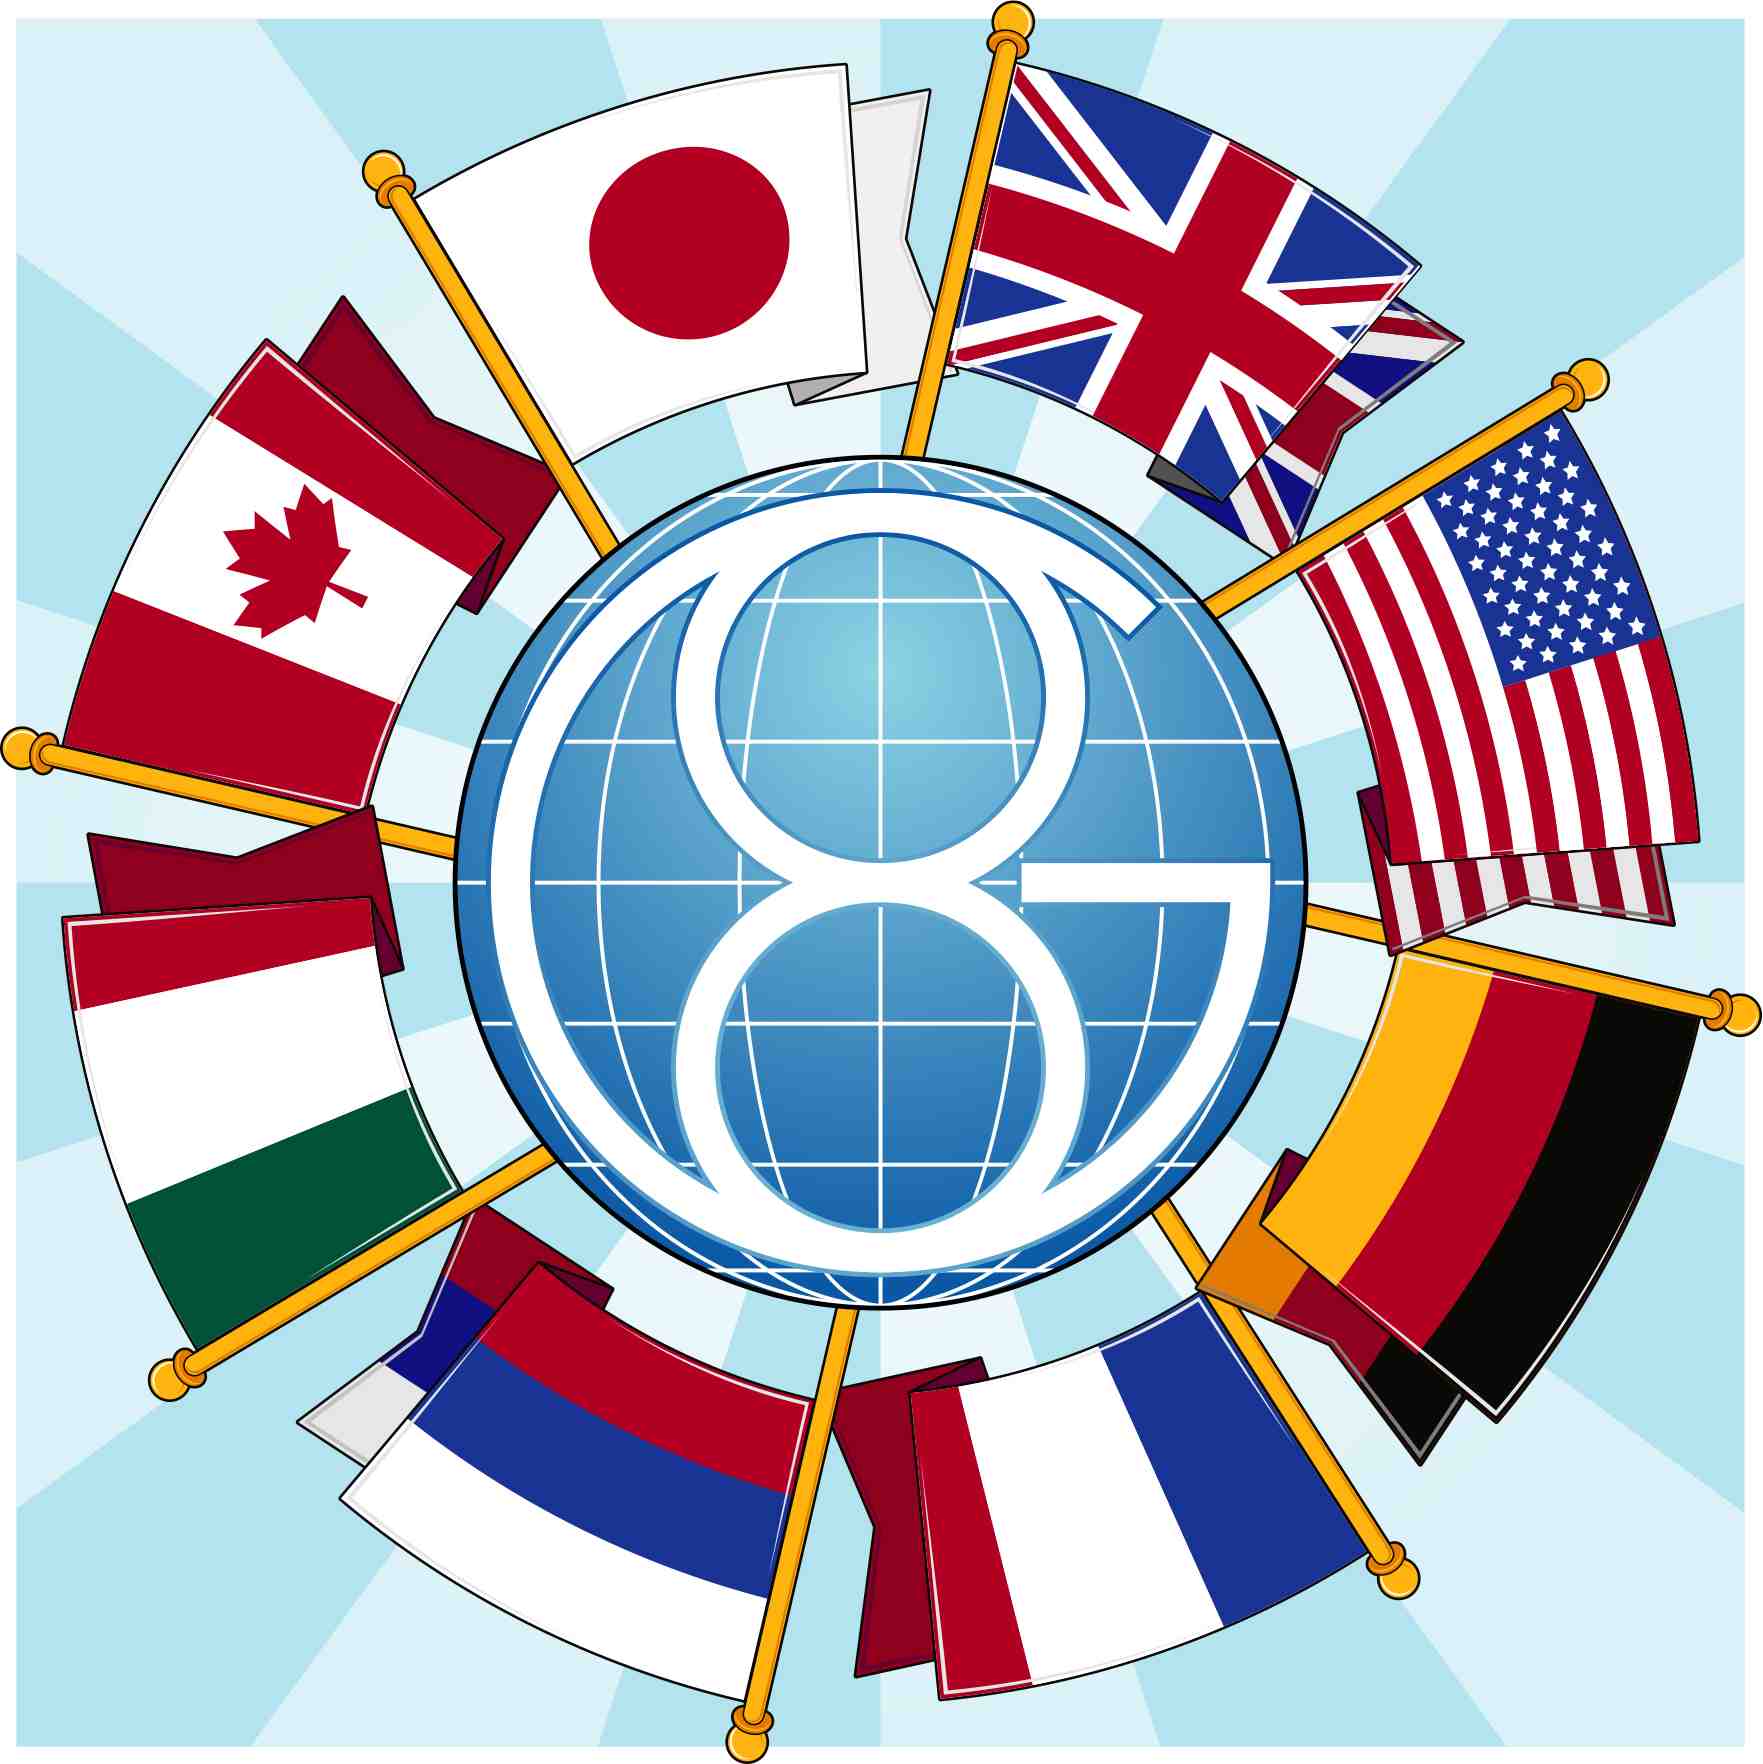 Image of G8 logo consisting of eight flags in a circle